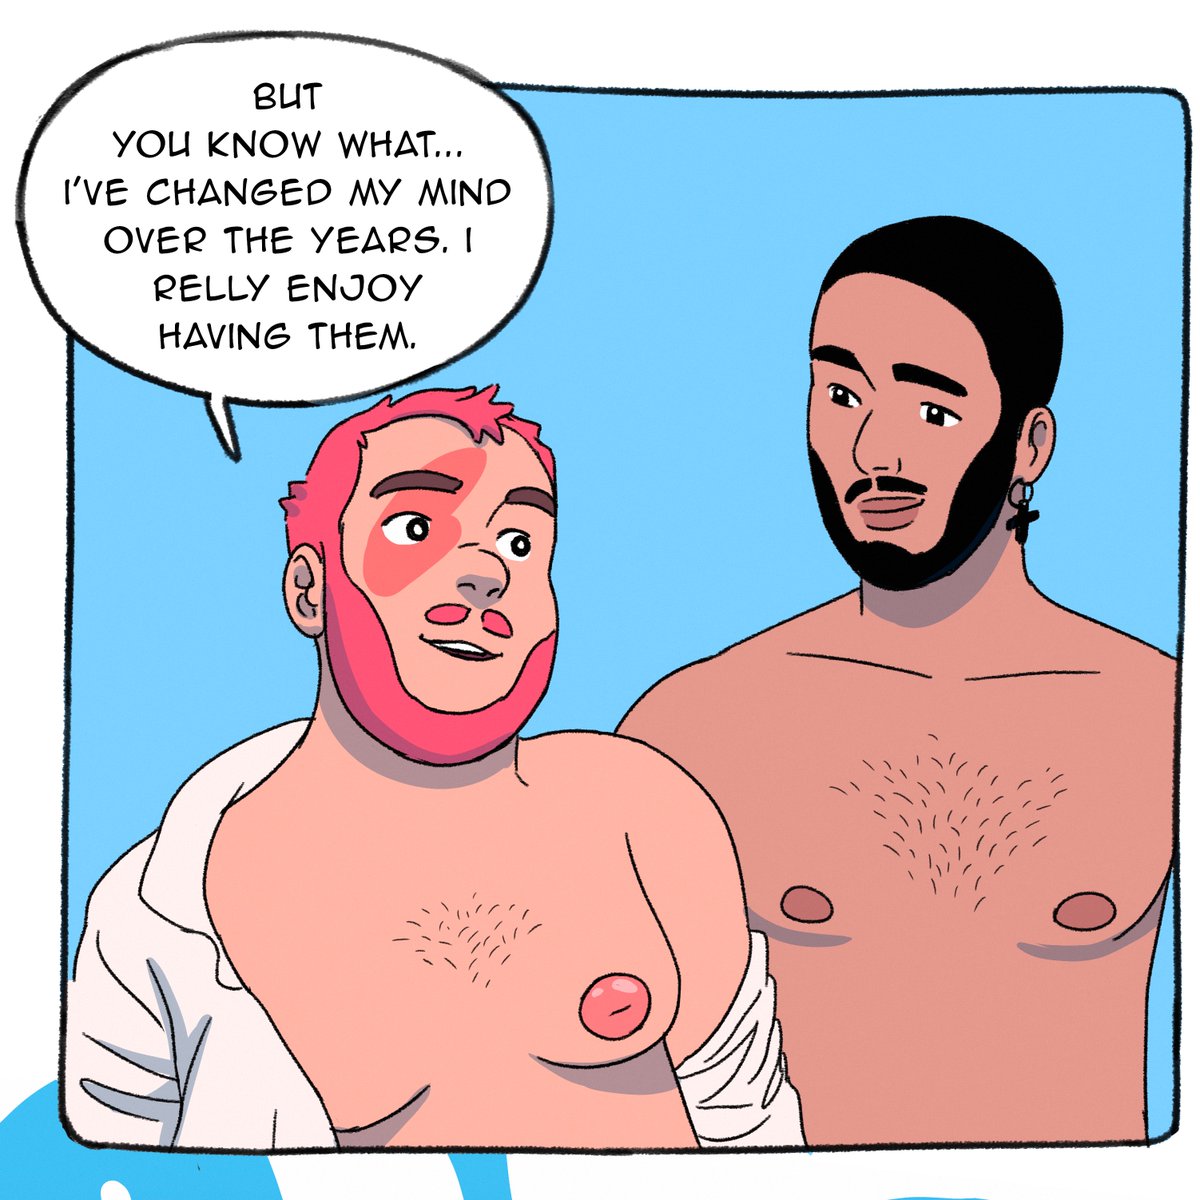 Hey, hi. I've made a short comic about my experience with having man boobs. To those dudes struggling with their self image because of their chest, I hope this helps! You can read it in full here: https://t.co/hojmKrVov5 